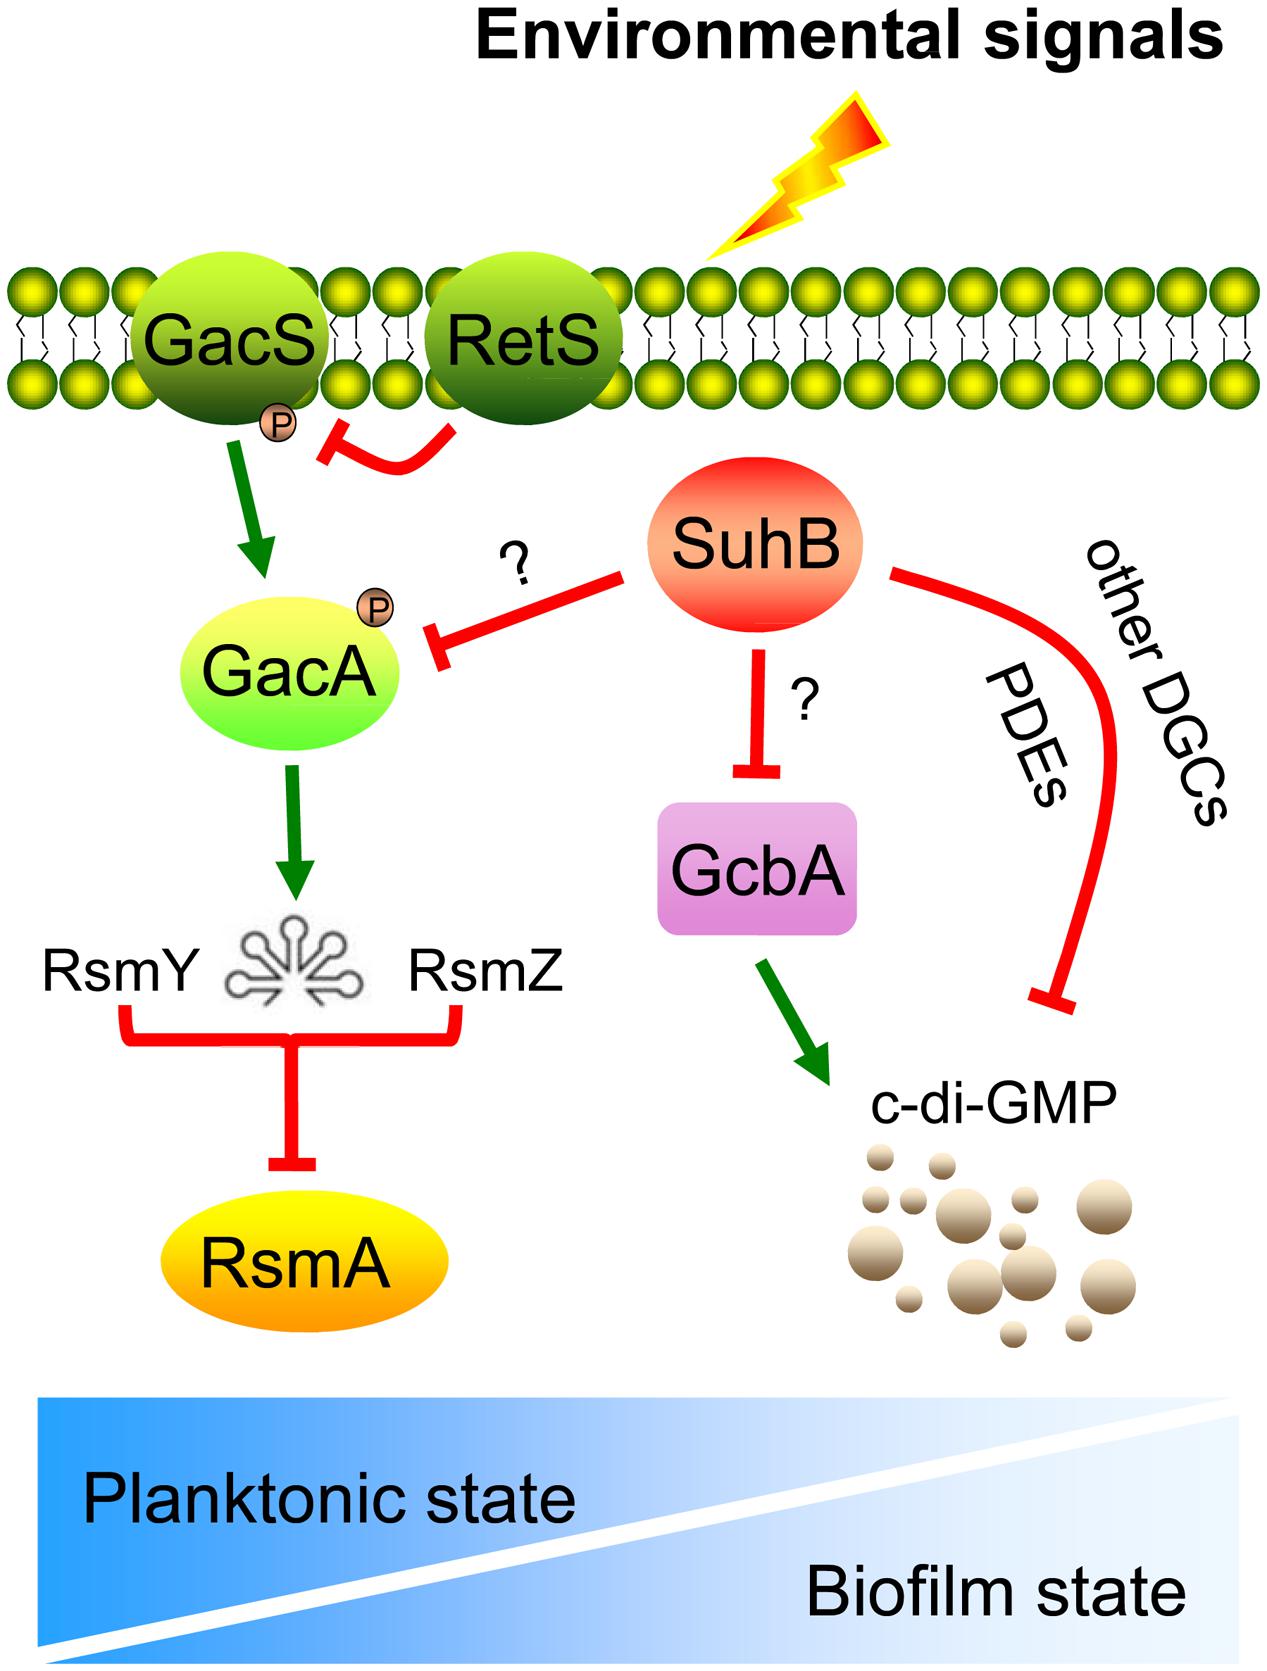 Frontiers Suhb Regulates The Motile Sessile Switch In Pseudomonas Aeruginosa Through The Gac Rsm Pathway And C Di Gmp Signaling Microbiology